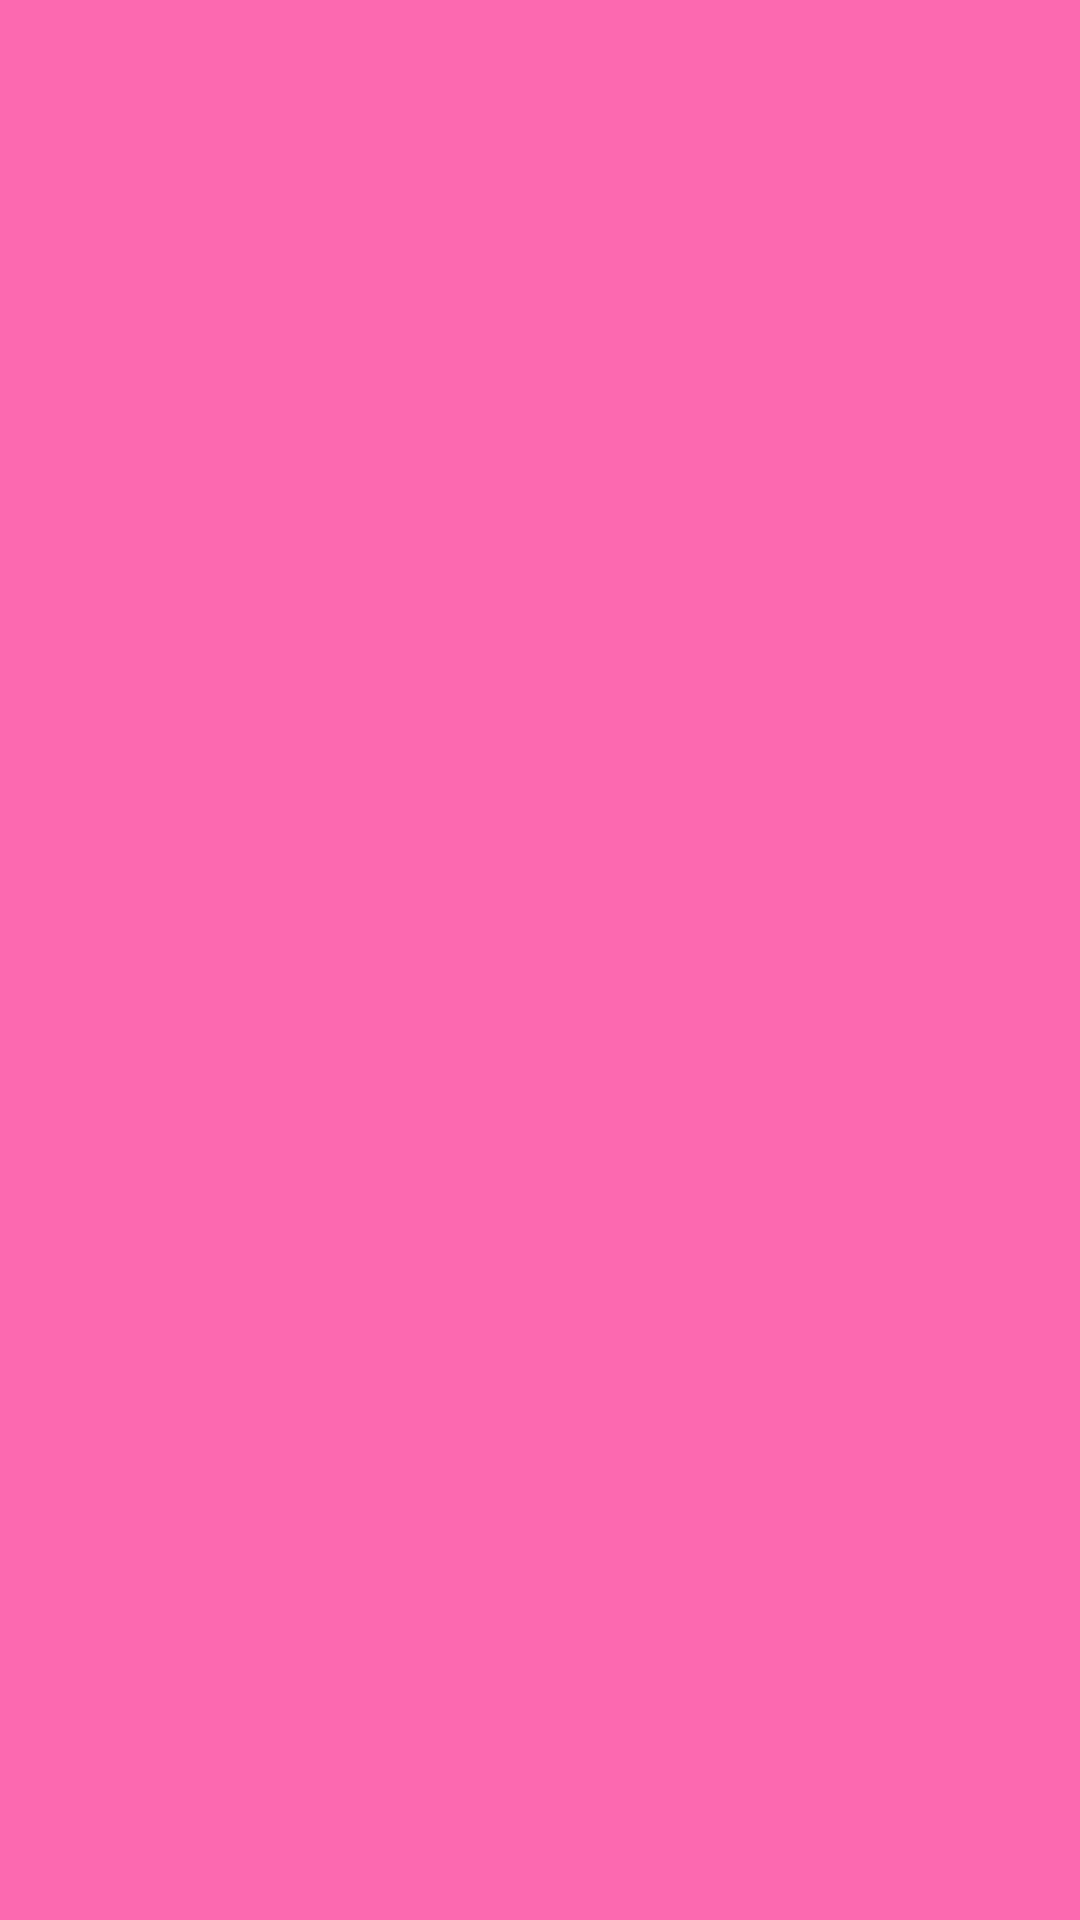 Download A beautiful vibrant pink color background